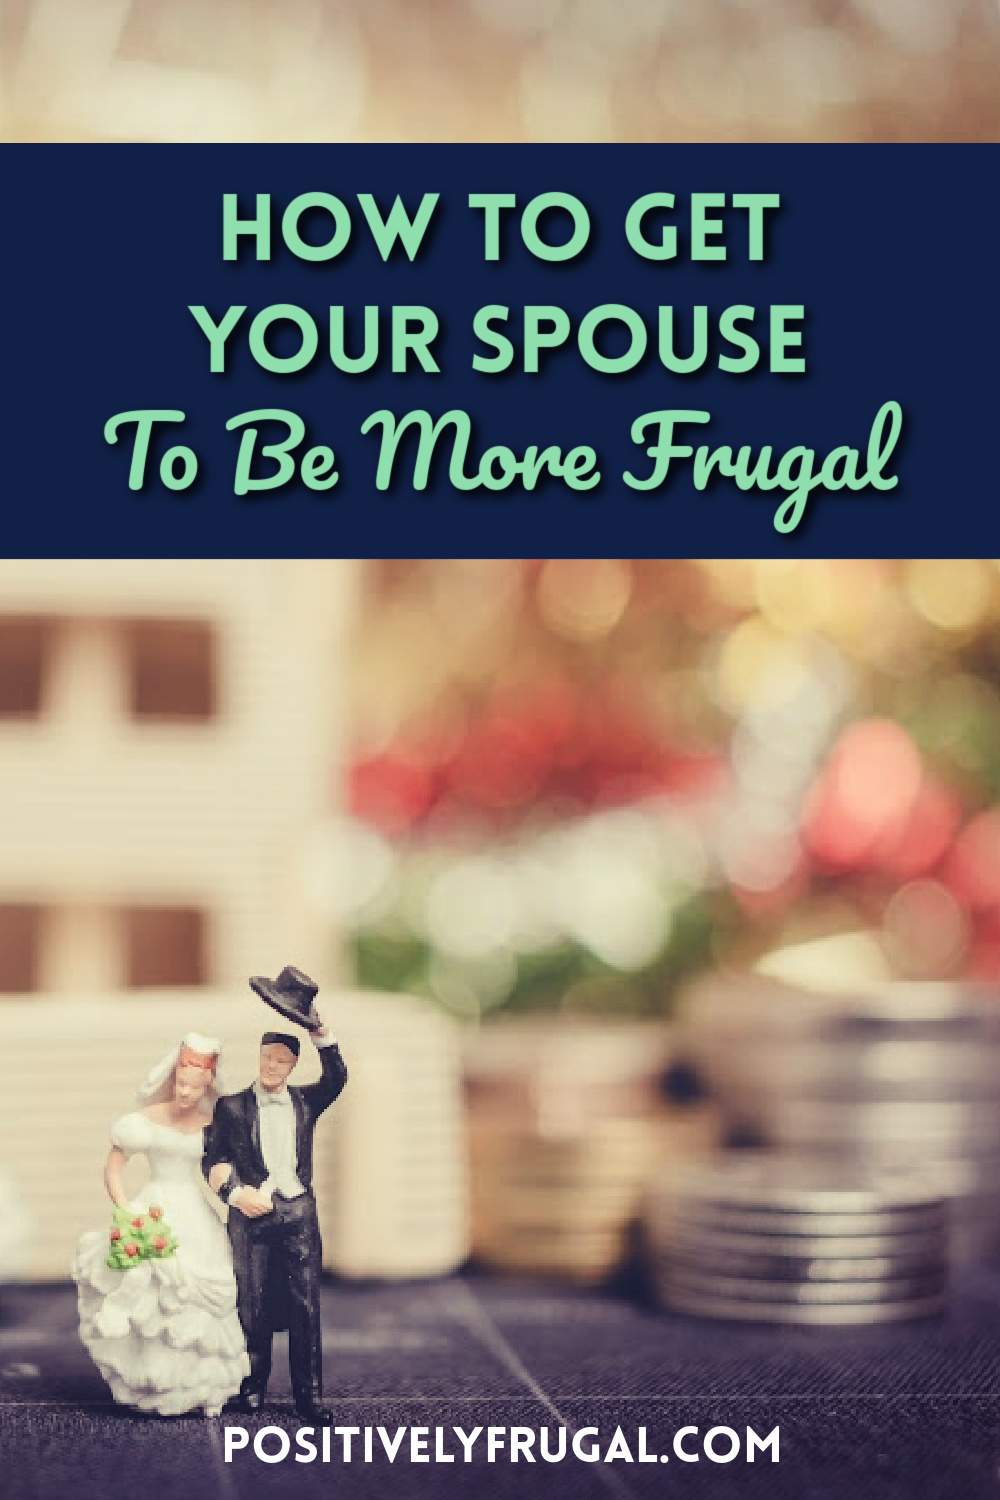 Get Your Spouse To Be More Frugal by PositivelyFrugal.com